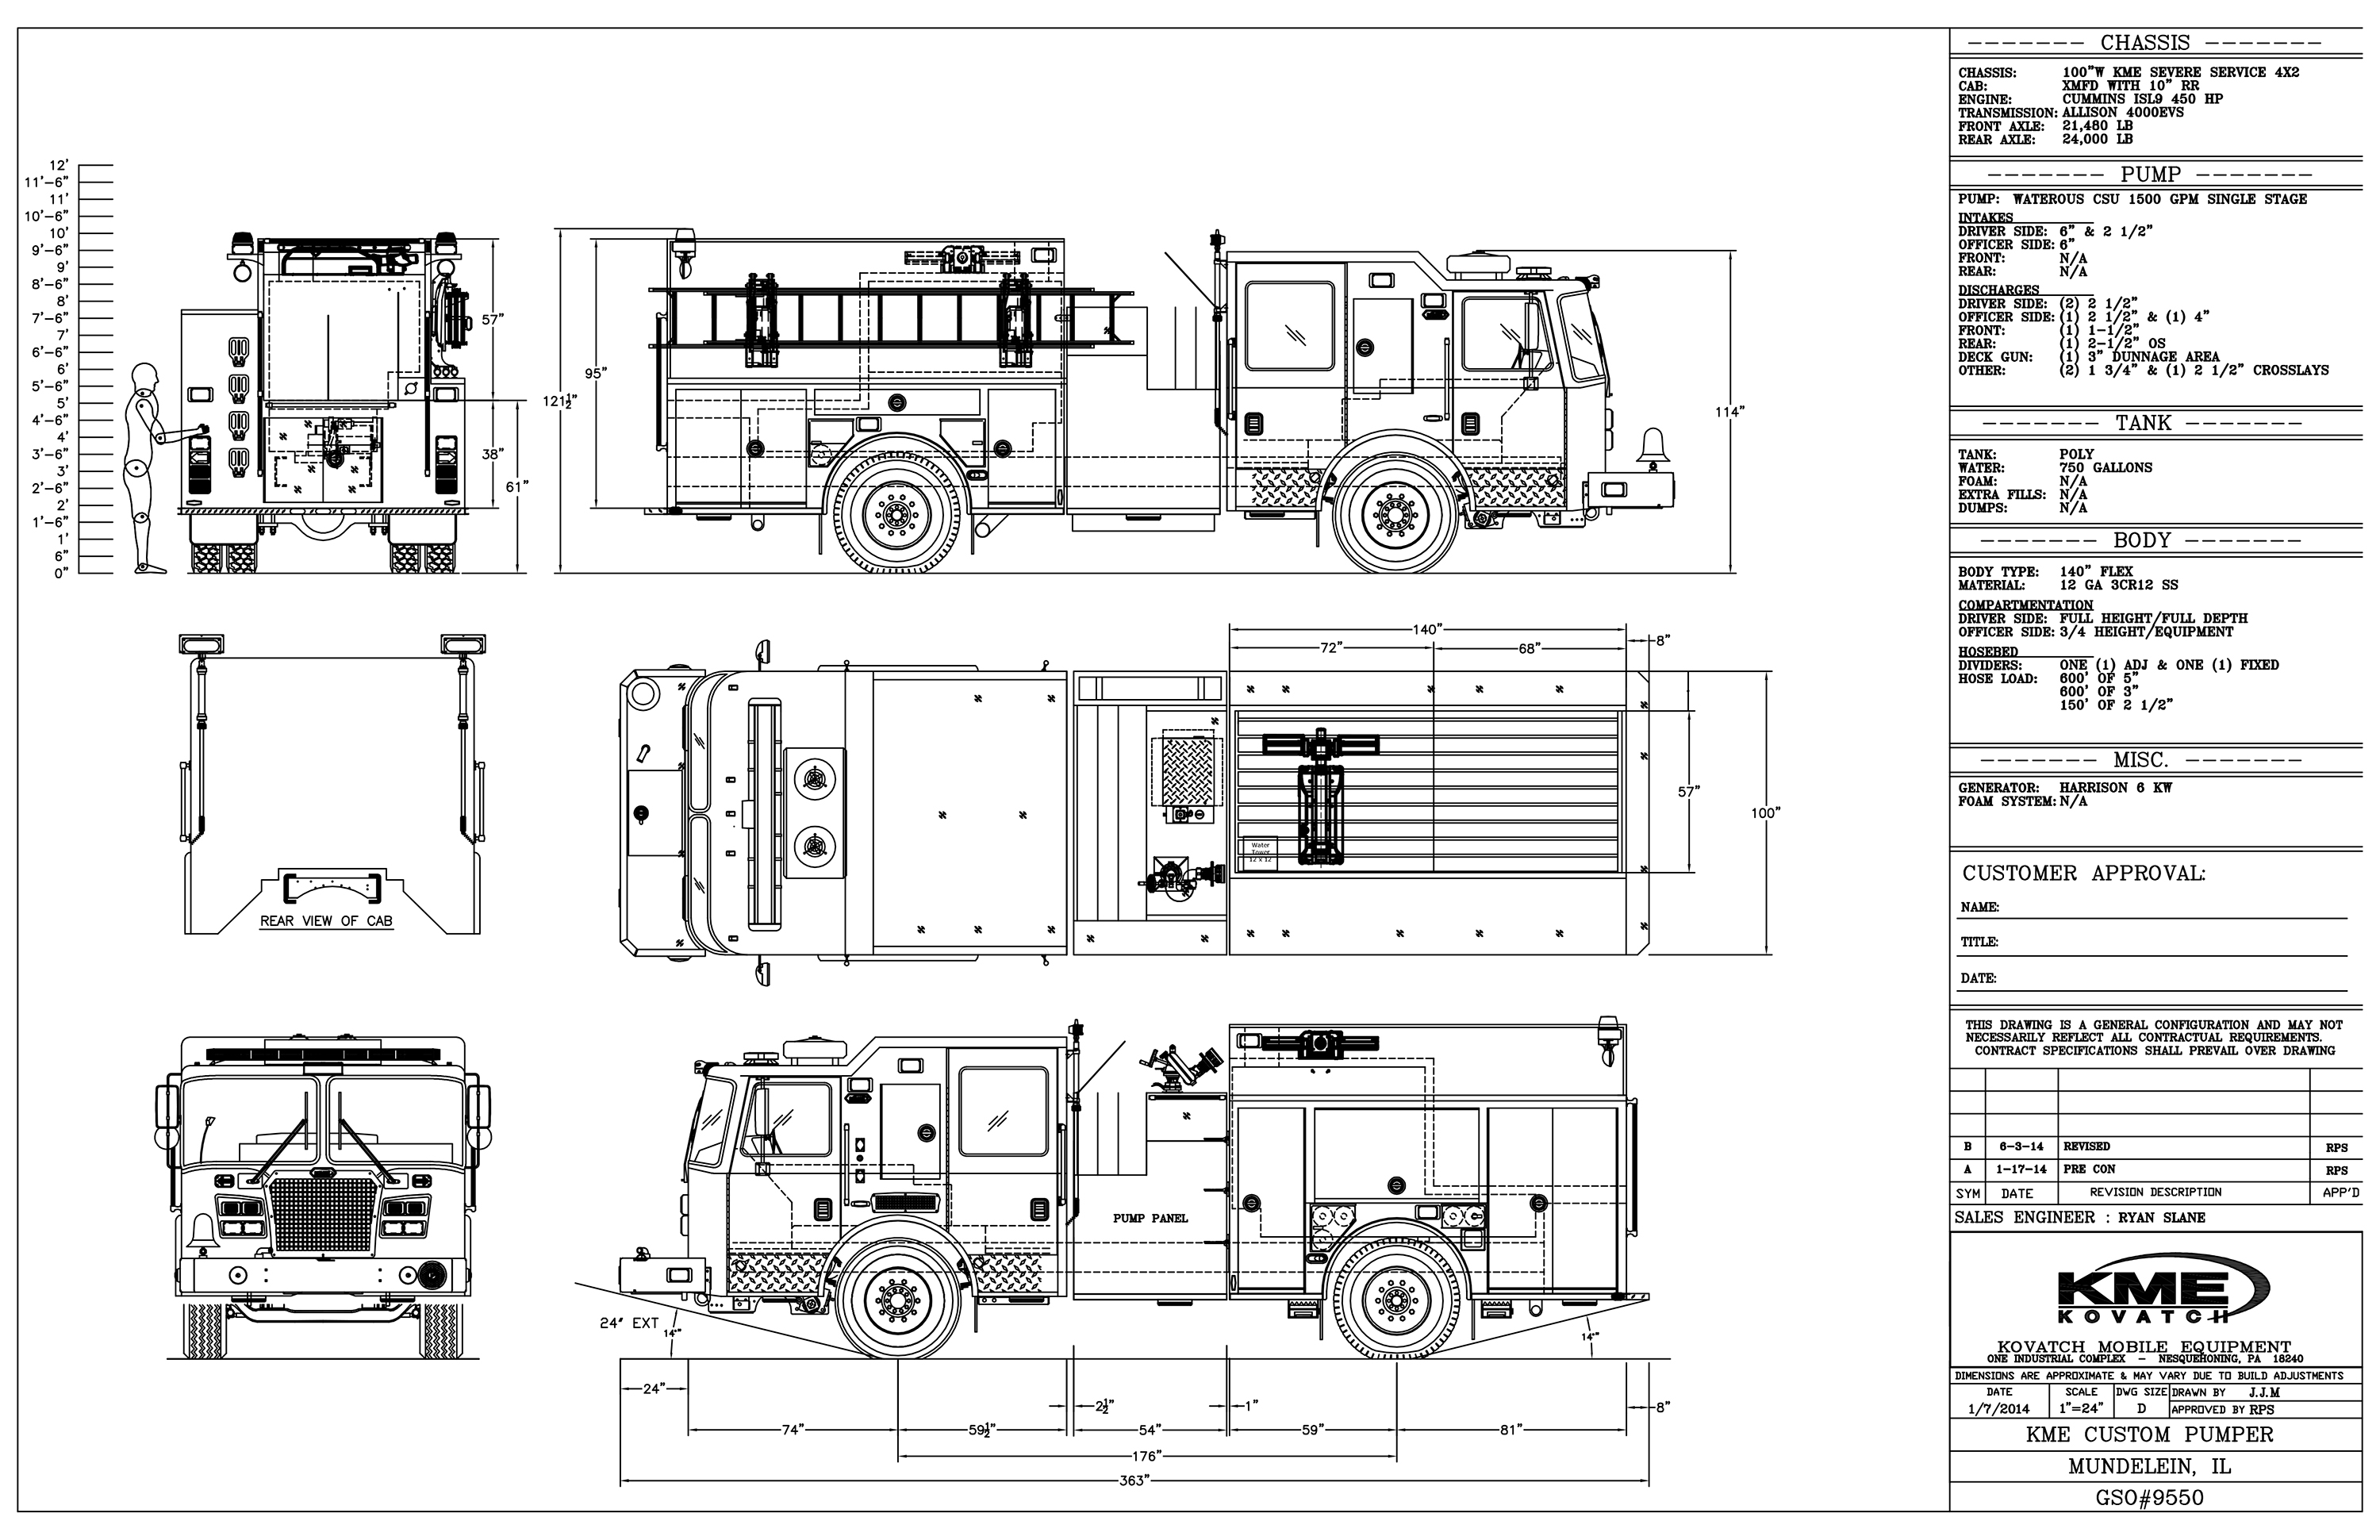 Fire Truck Drawing Image - Drawing Skill